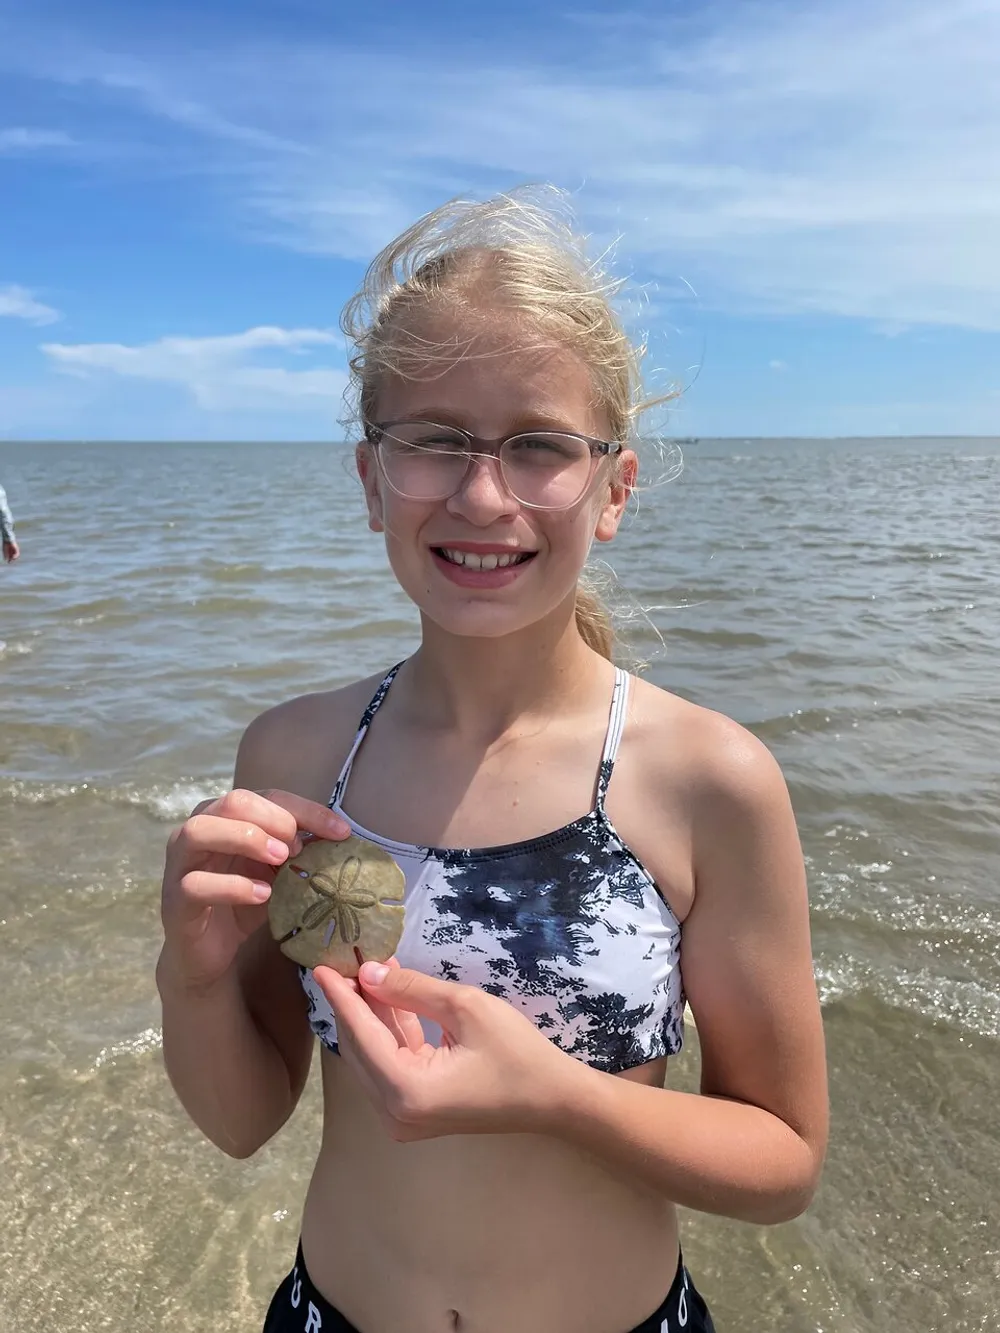 A smiling girl with glasses is holding a sand dollar at the beach on a sunny day